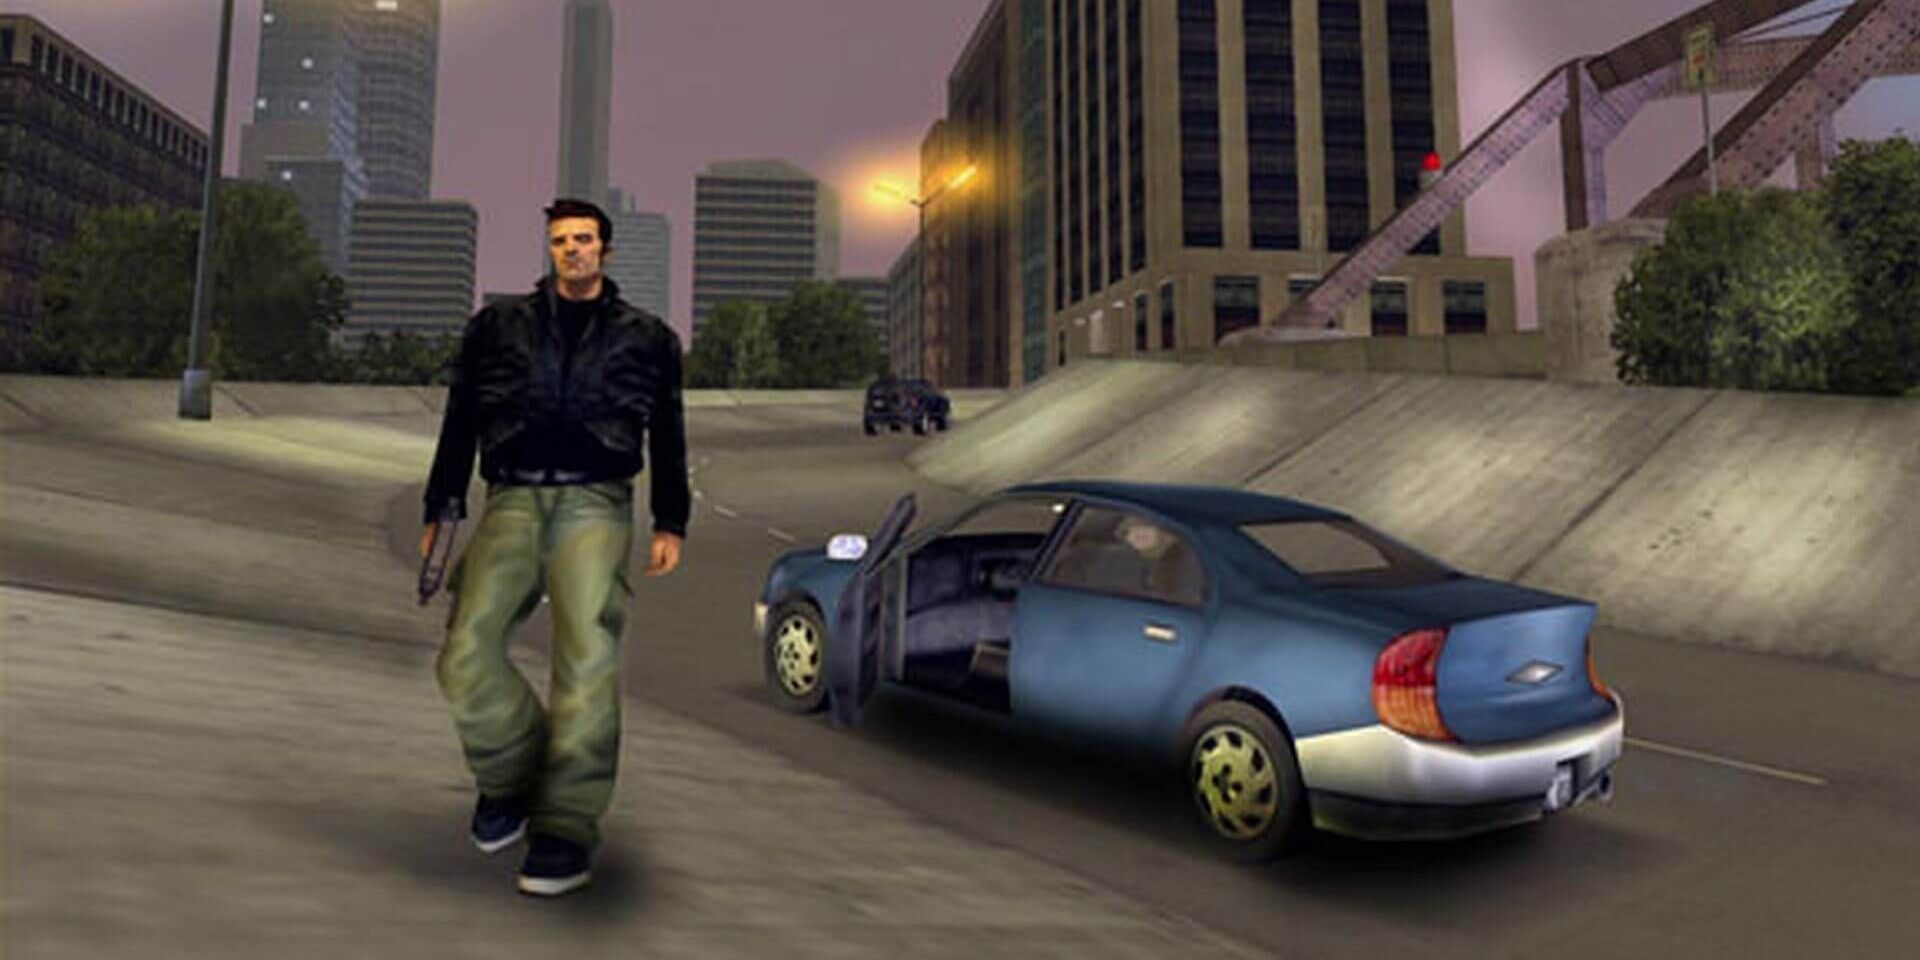 Claude leaves his vehicle in Grand Theft Auto III